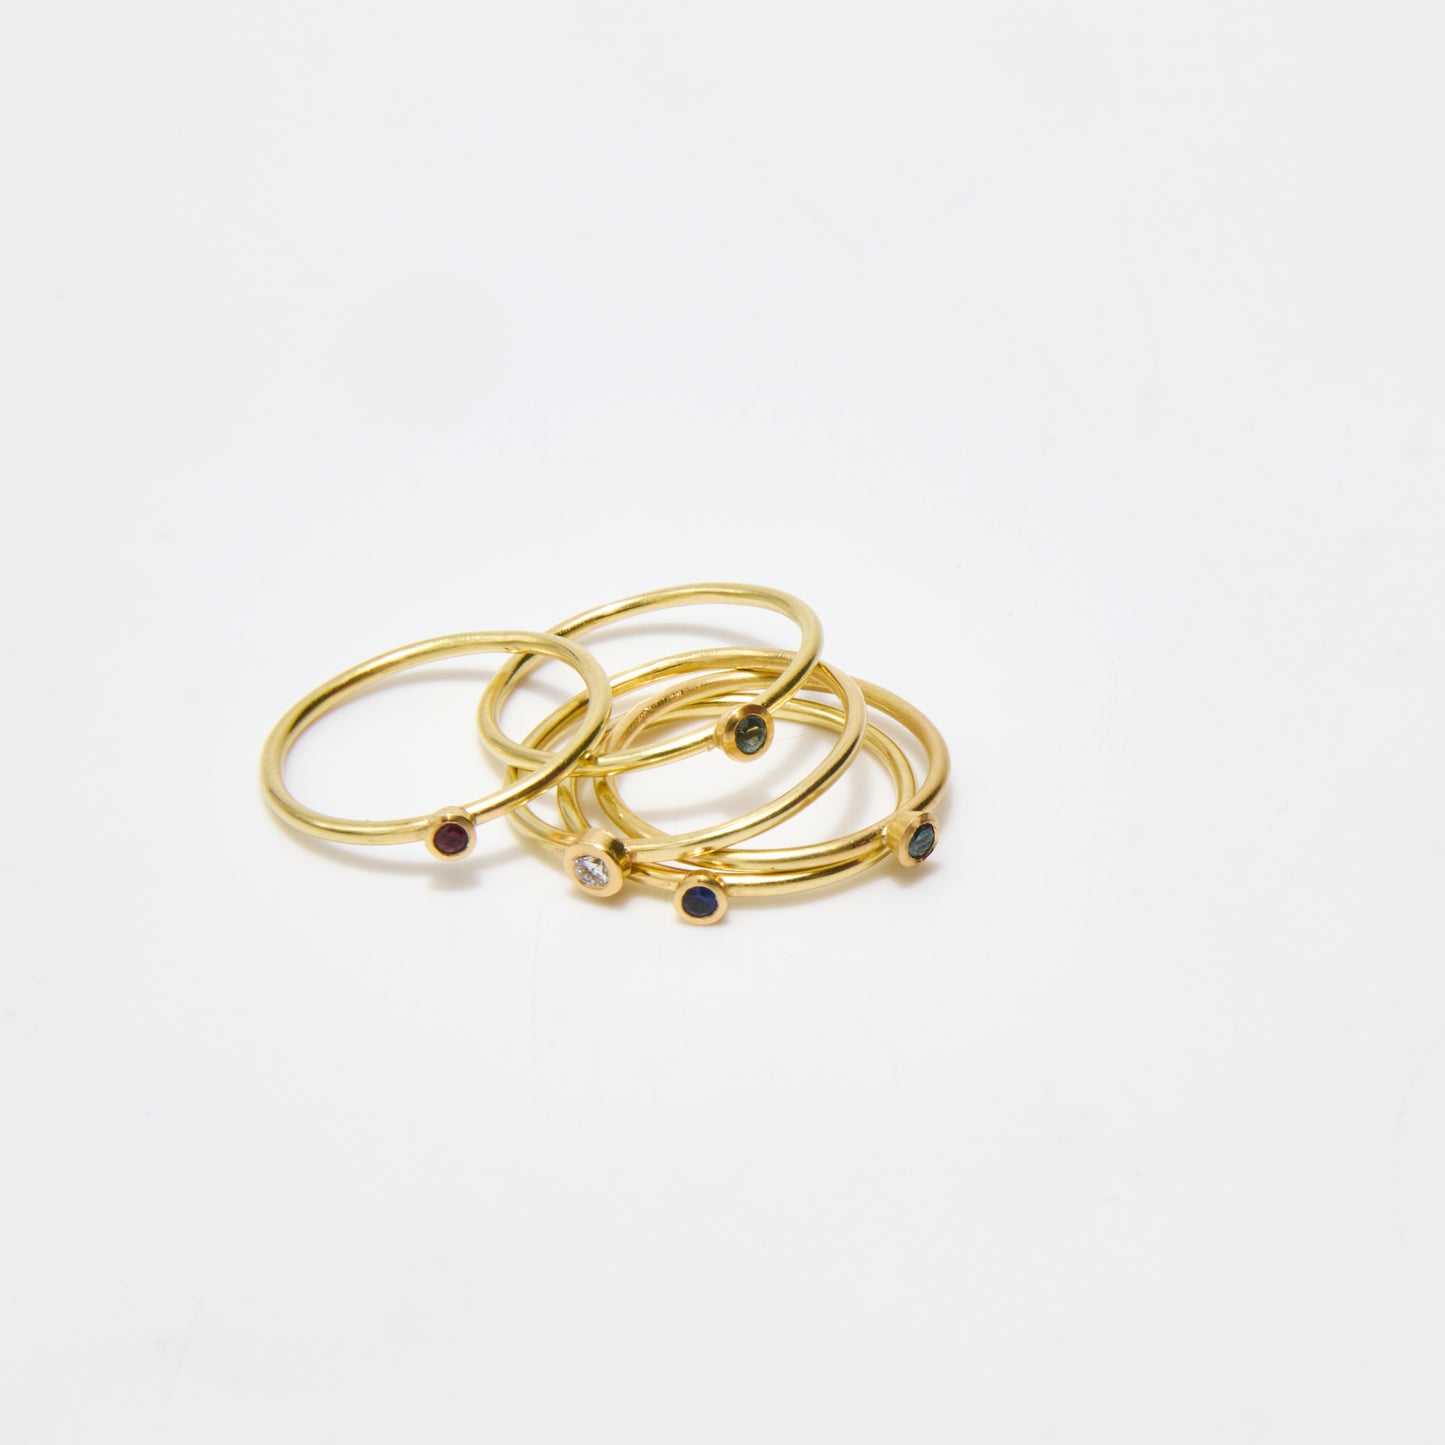 Ringe "Tiny and colorful"